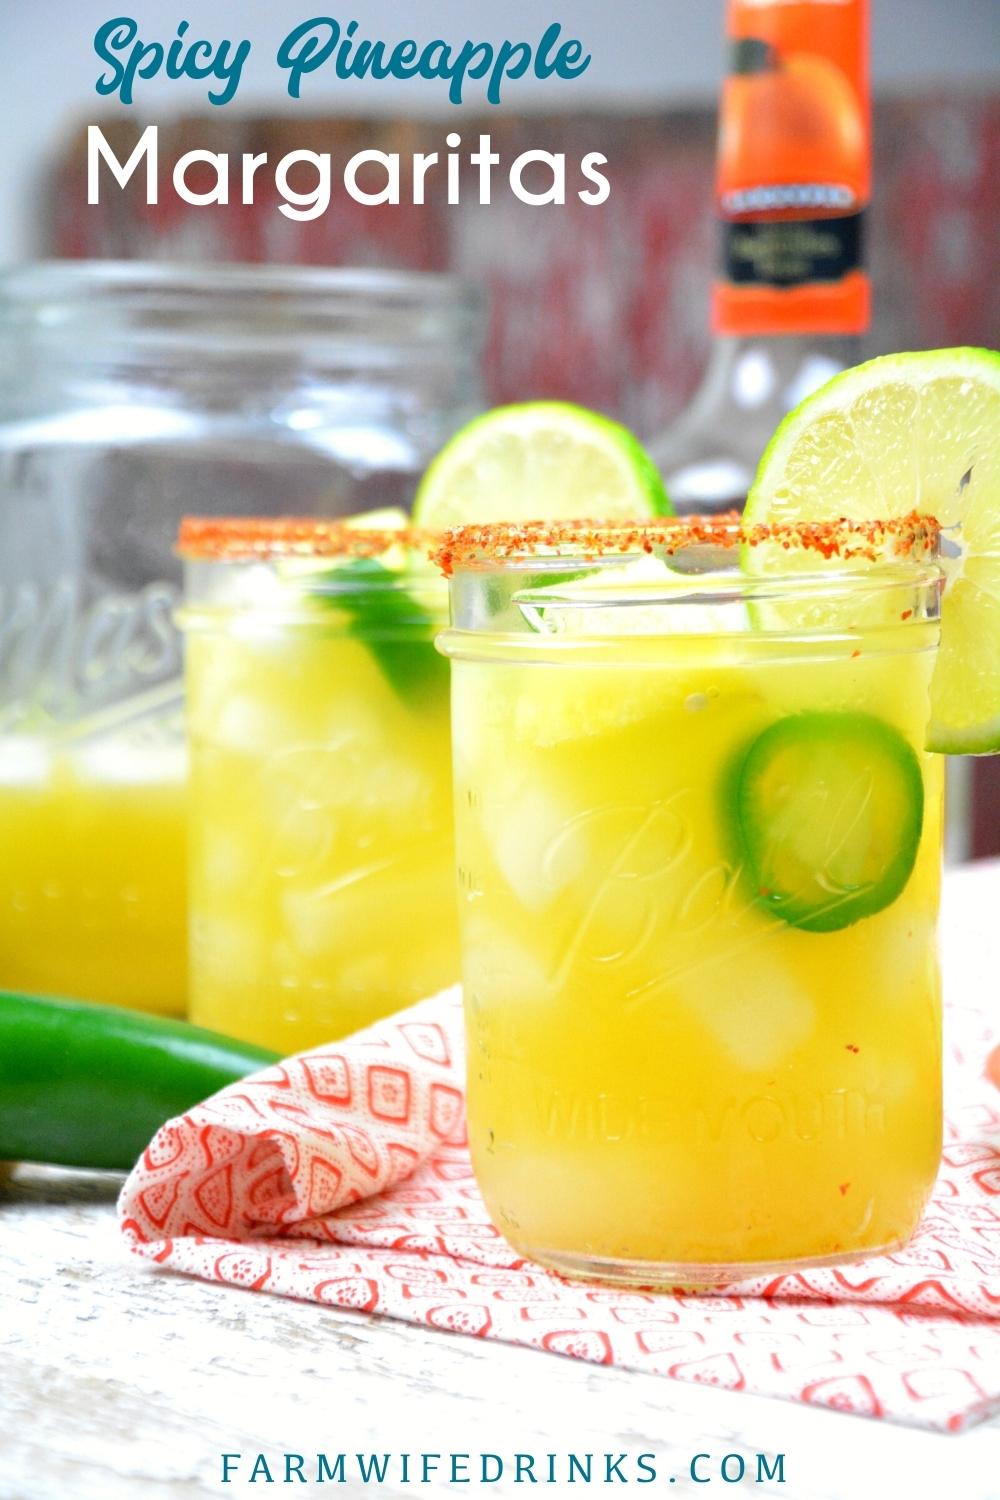 Spicy Pineapple Margaritas are an easy pineapple jalapeno margarita made with silver tequila, triple sec, pineapple and lime juices, and jalapenos with Tajin seasoning rimmed glass.